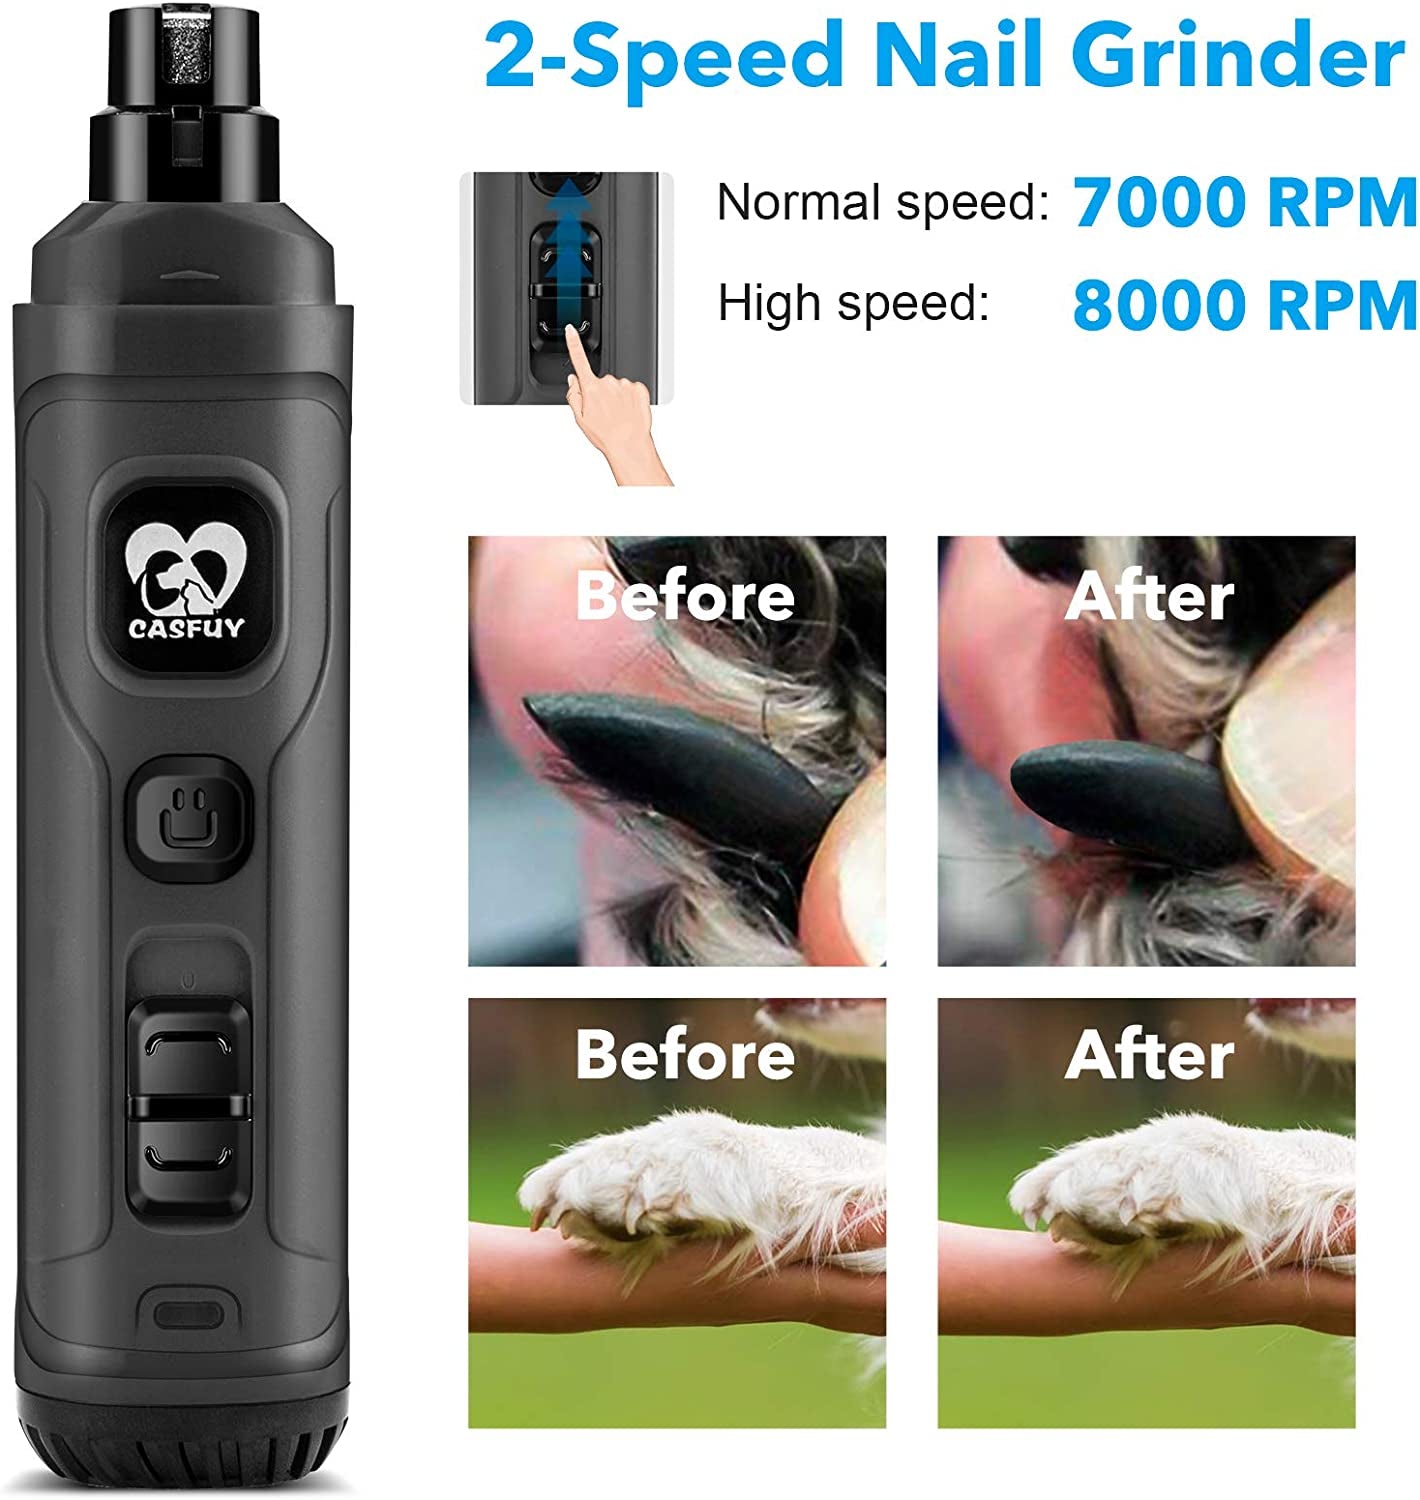 Dog Nail Grinder with 2 LED Light - New Version 2-Speed Powerful Electric Pet Nail Trimmer Professional Quiet Painless Paws Grooming & Smoothing for Small Medium Large Dogs and Cats (Grey)